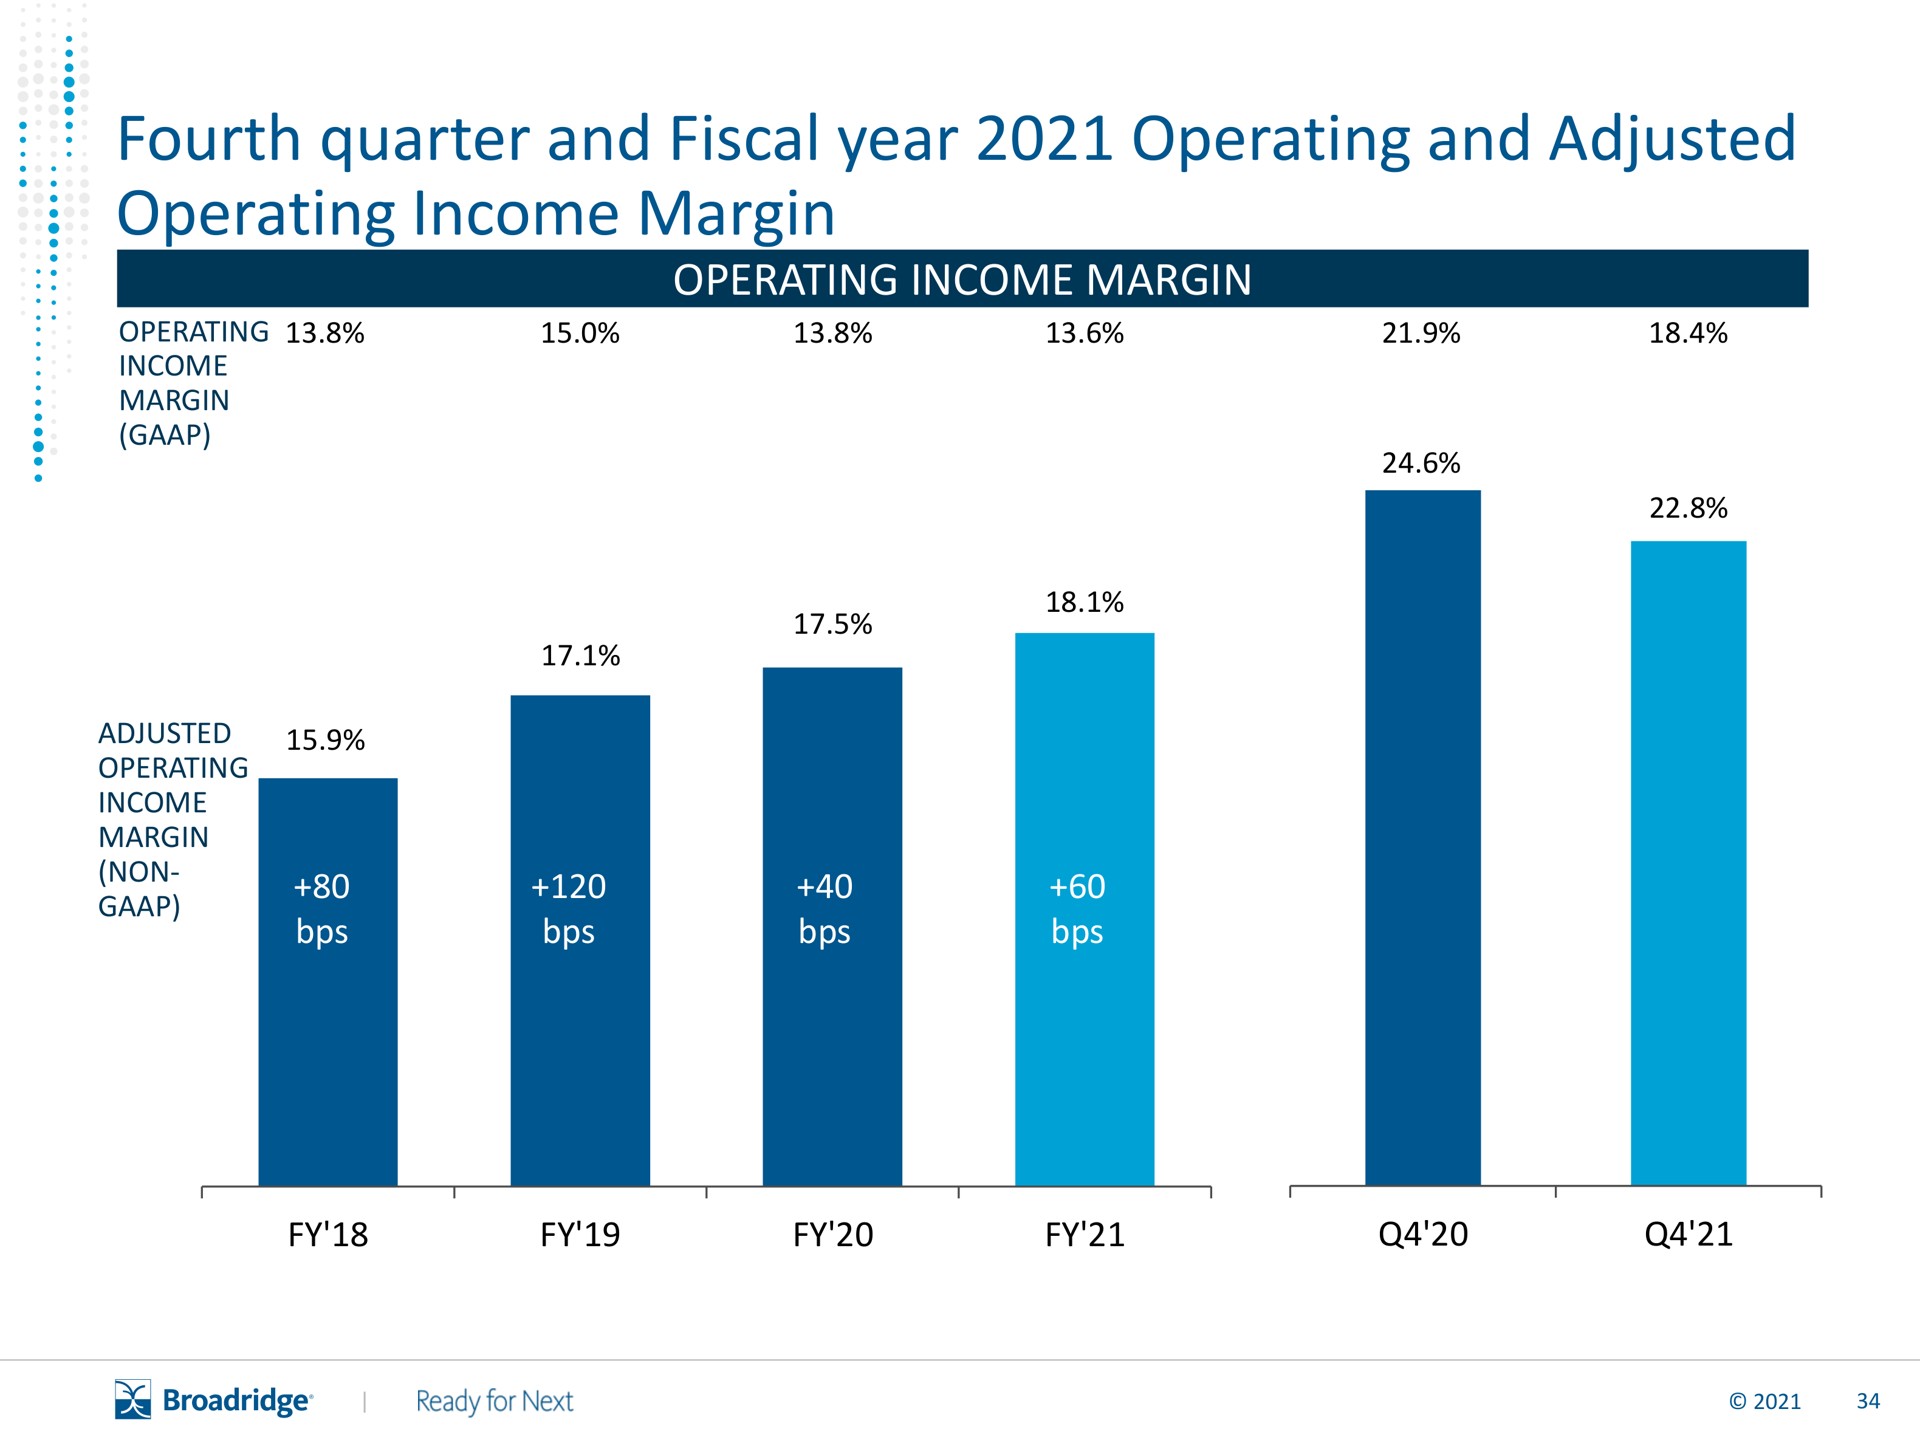 fourth quarter and fiscal year operating and adjusted operating income margin | Broadridge Financial Solutions